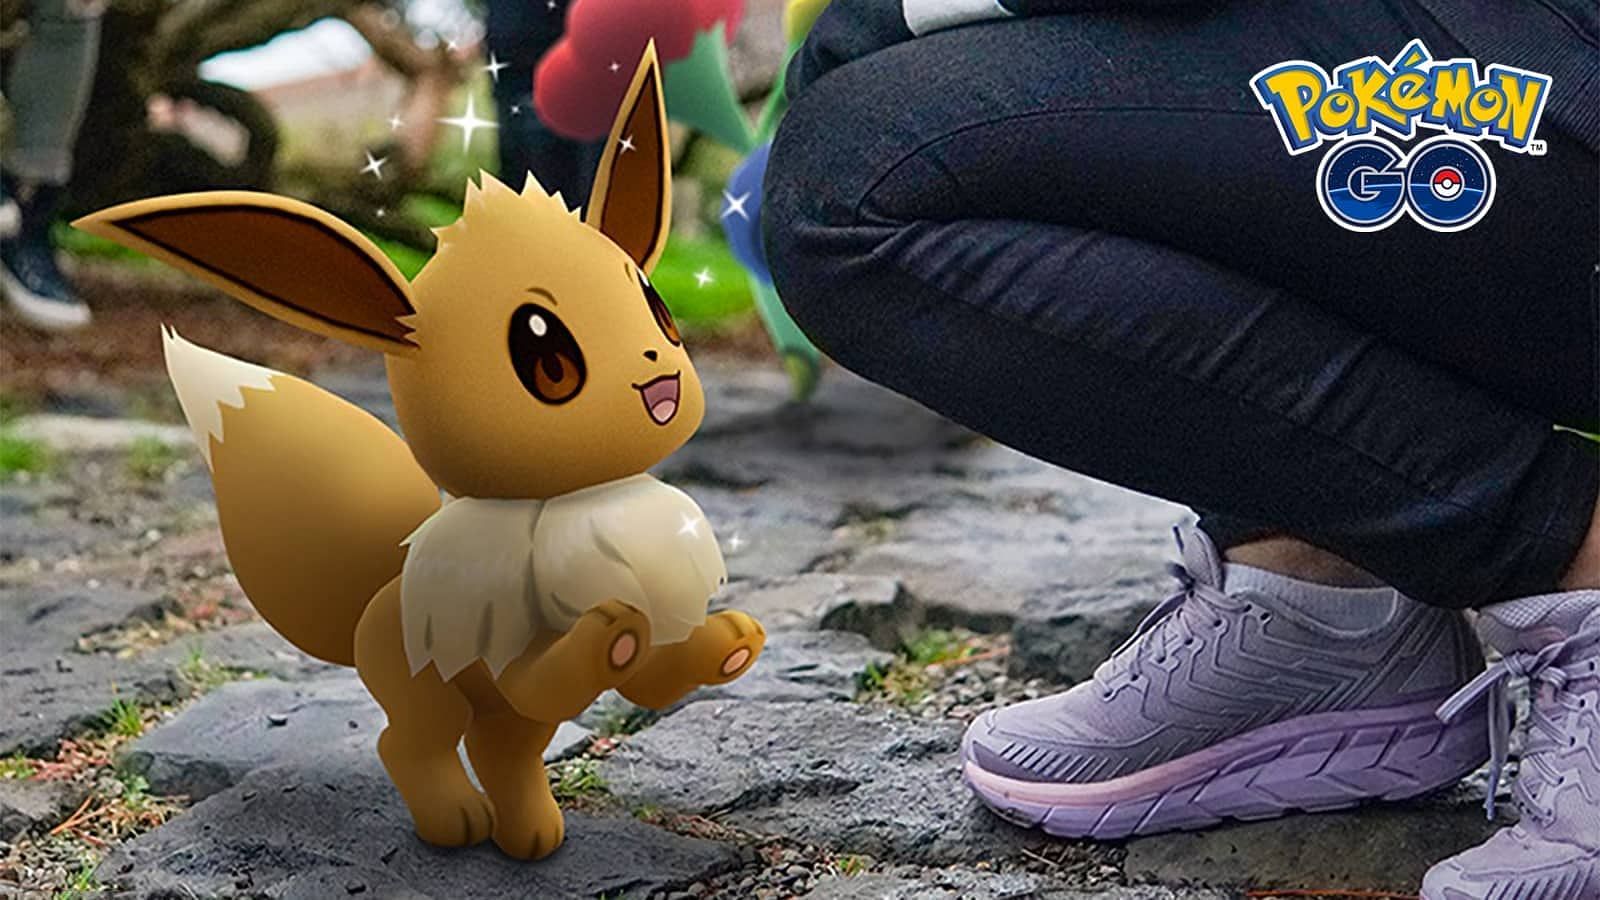 Eevee evolves as a adventure together buddy Pokemon in the game. (Image via Niantic)